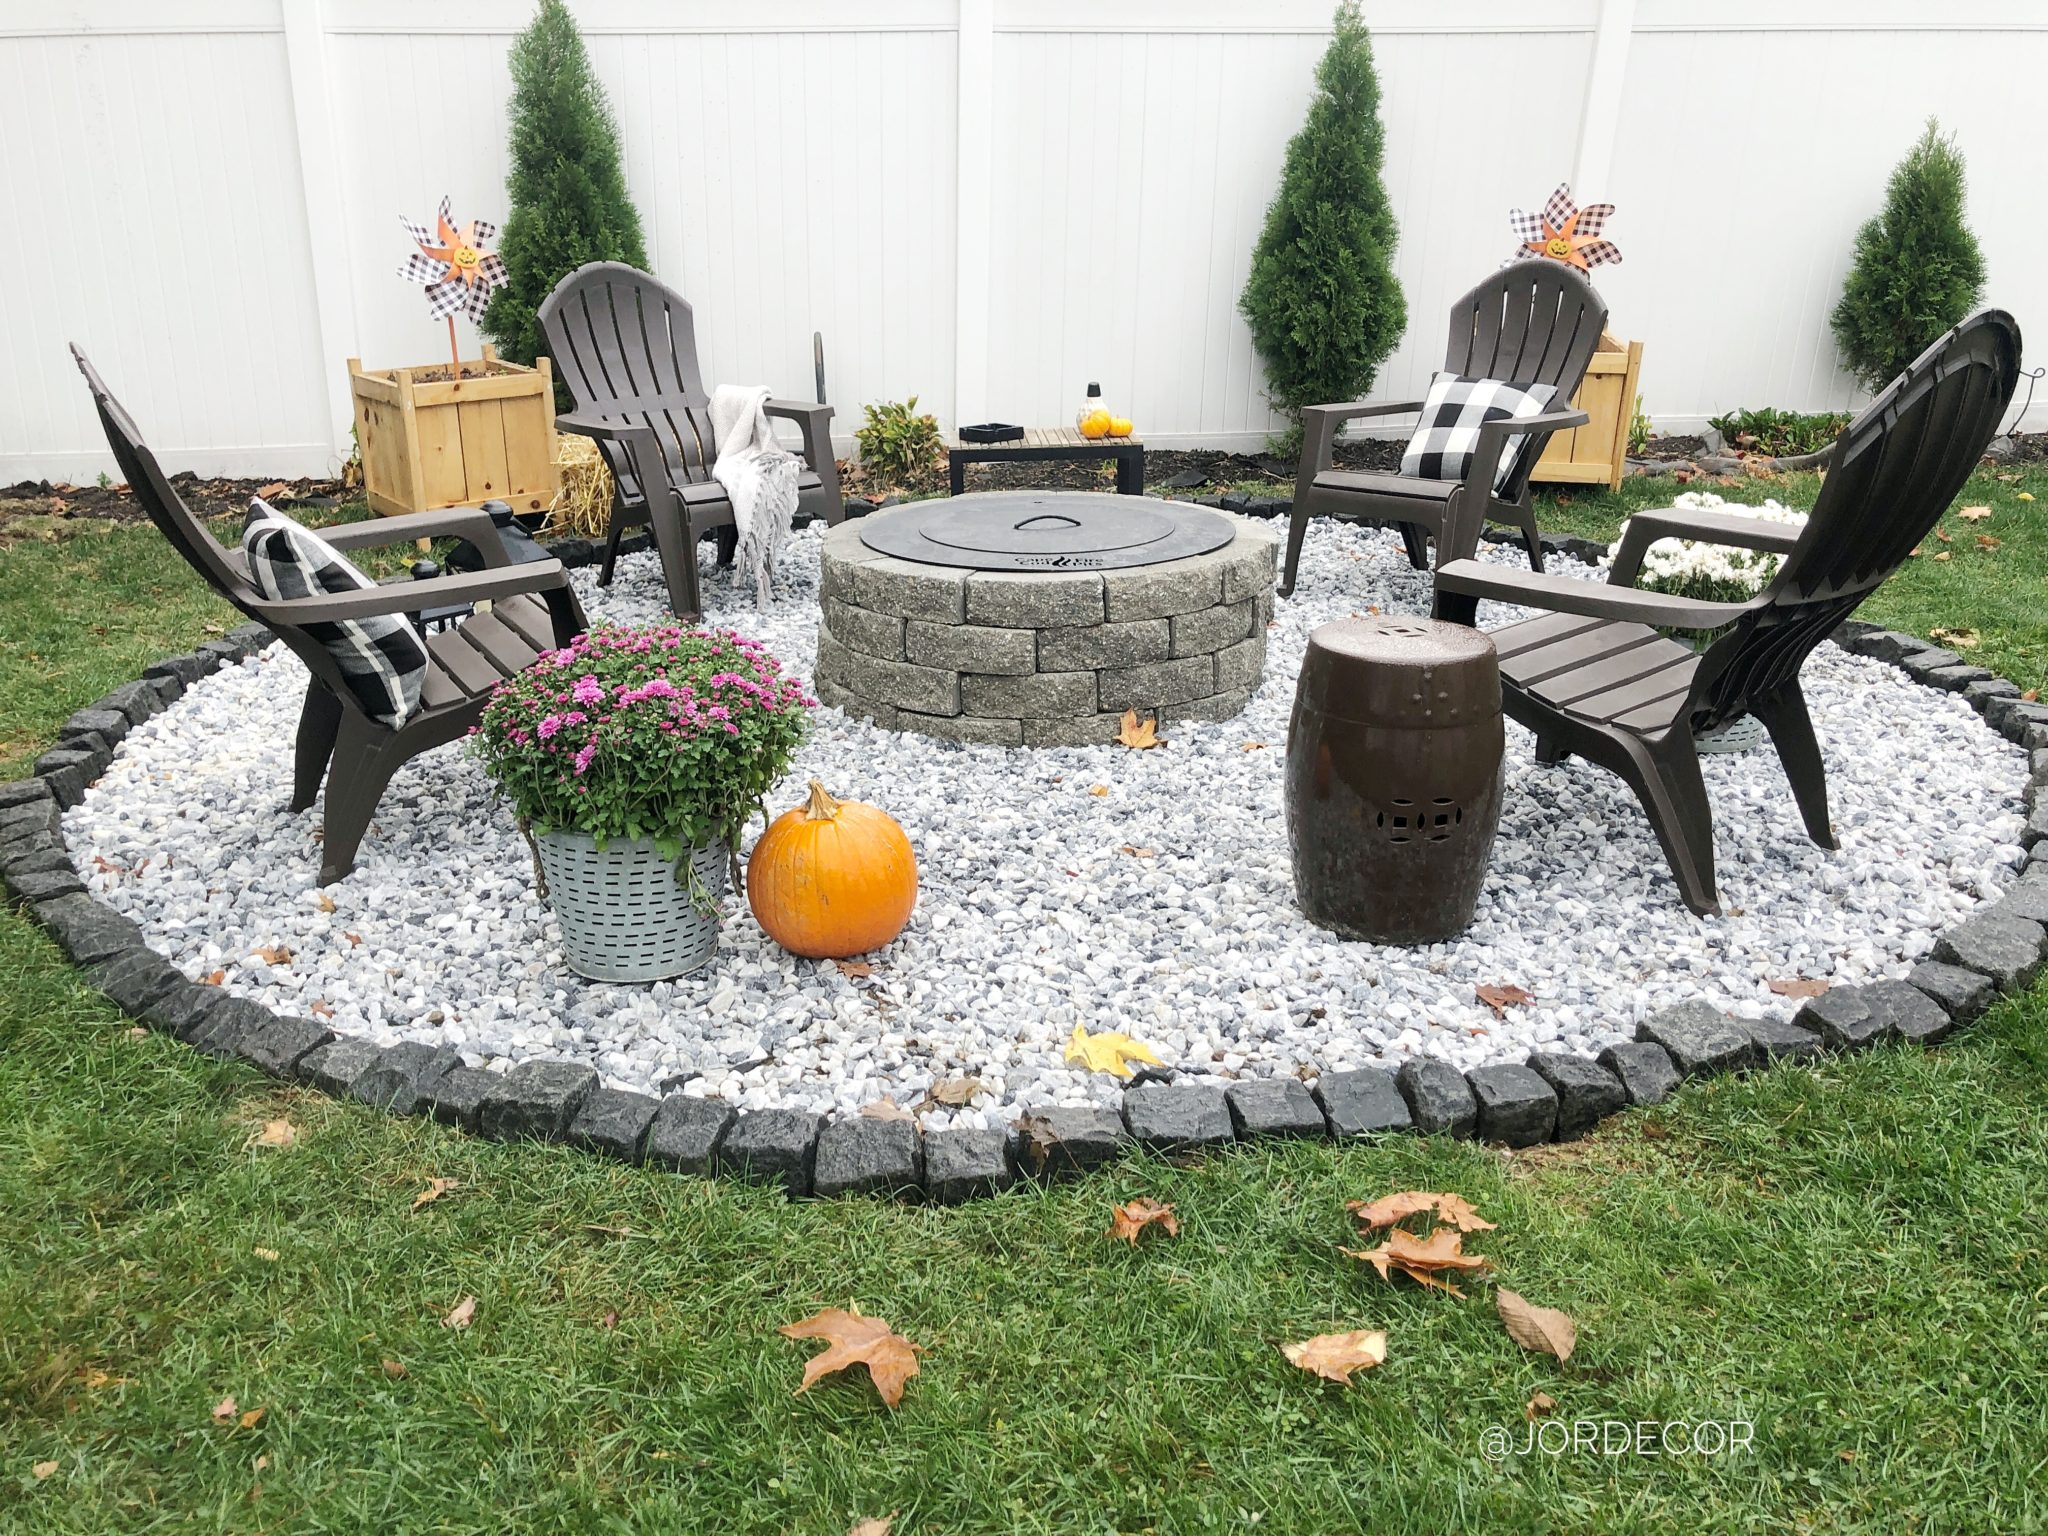 Diy Fire Pit Area In A Weekend Jordecor, How To Create A Fire Pit Area